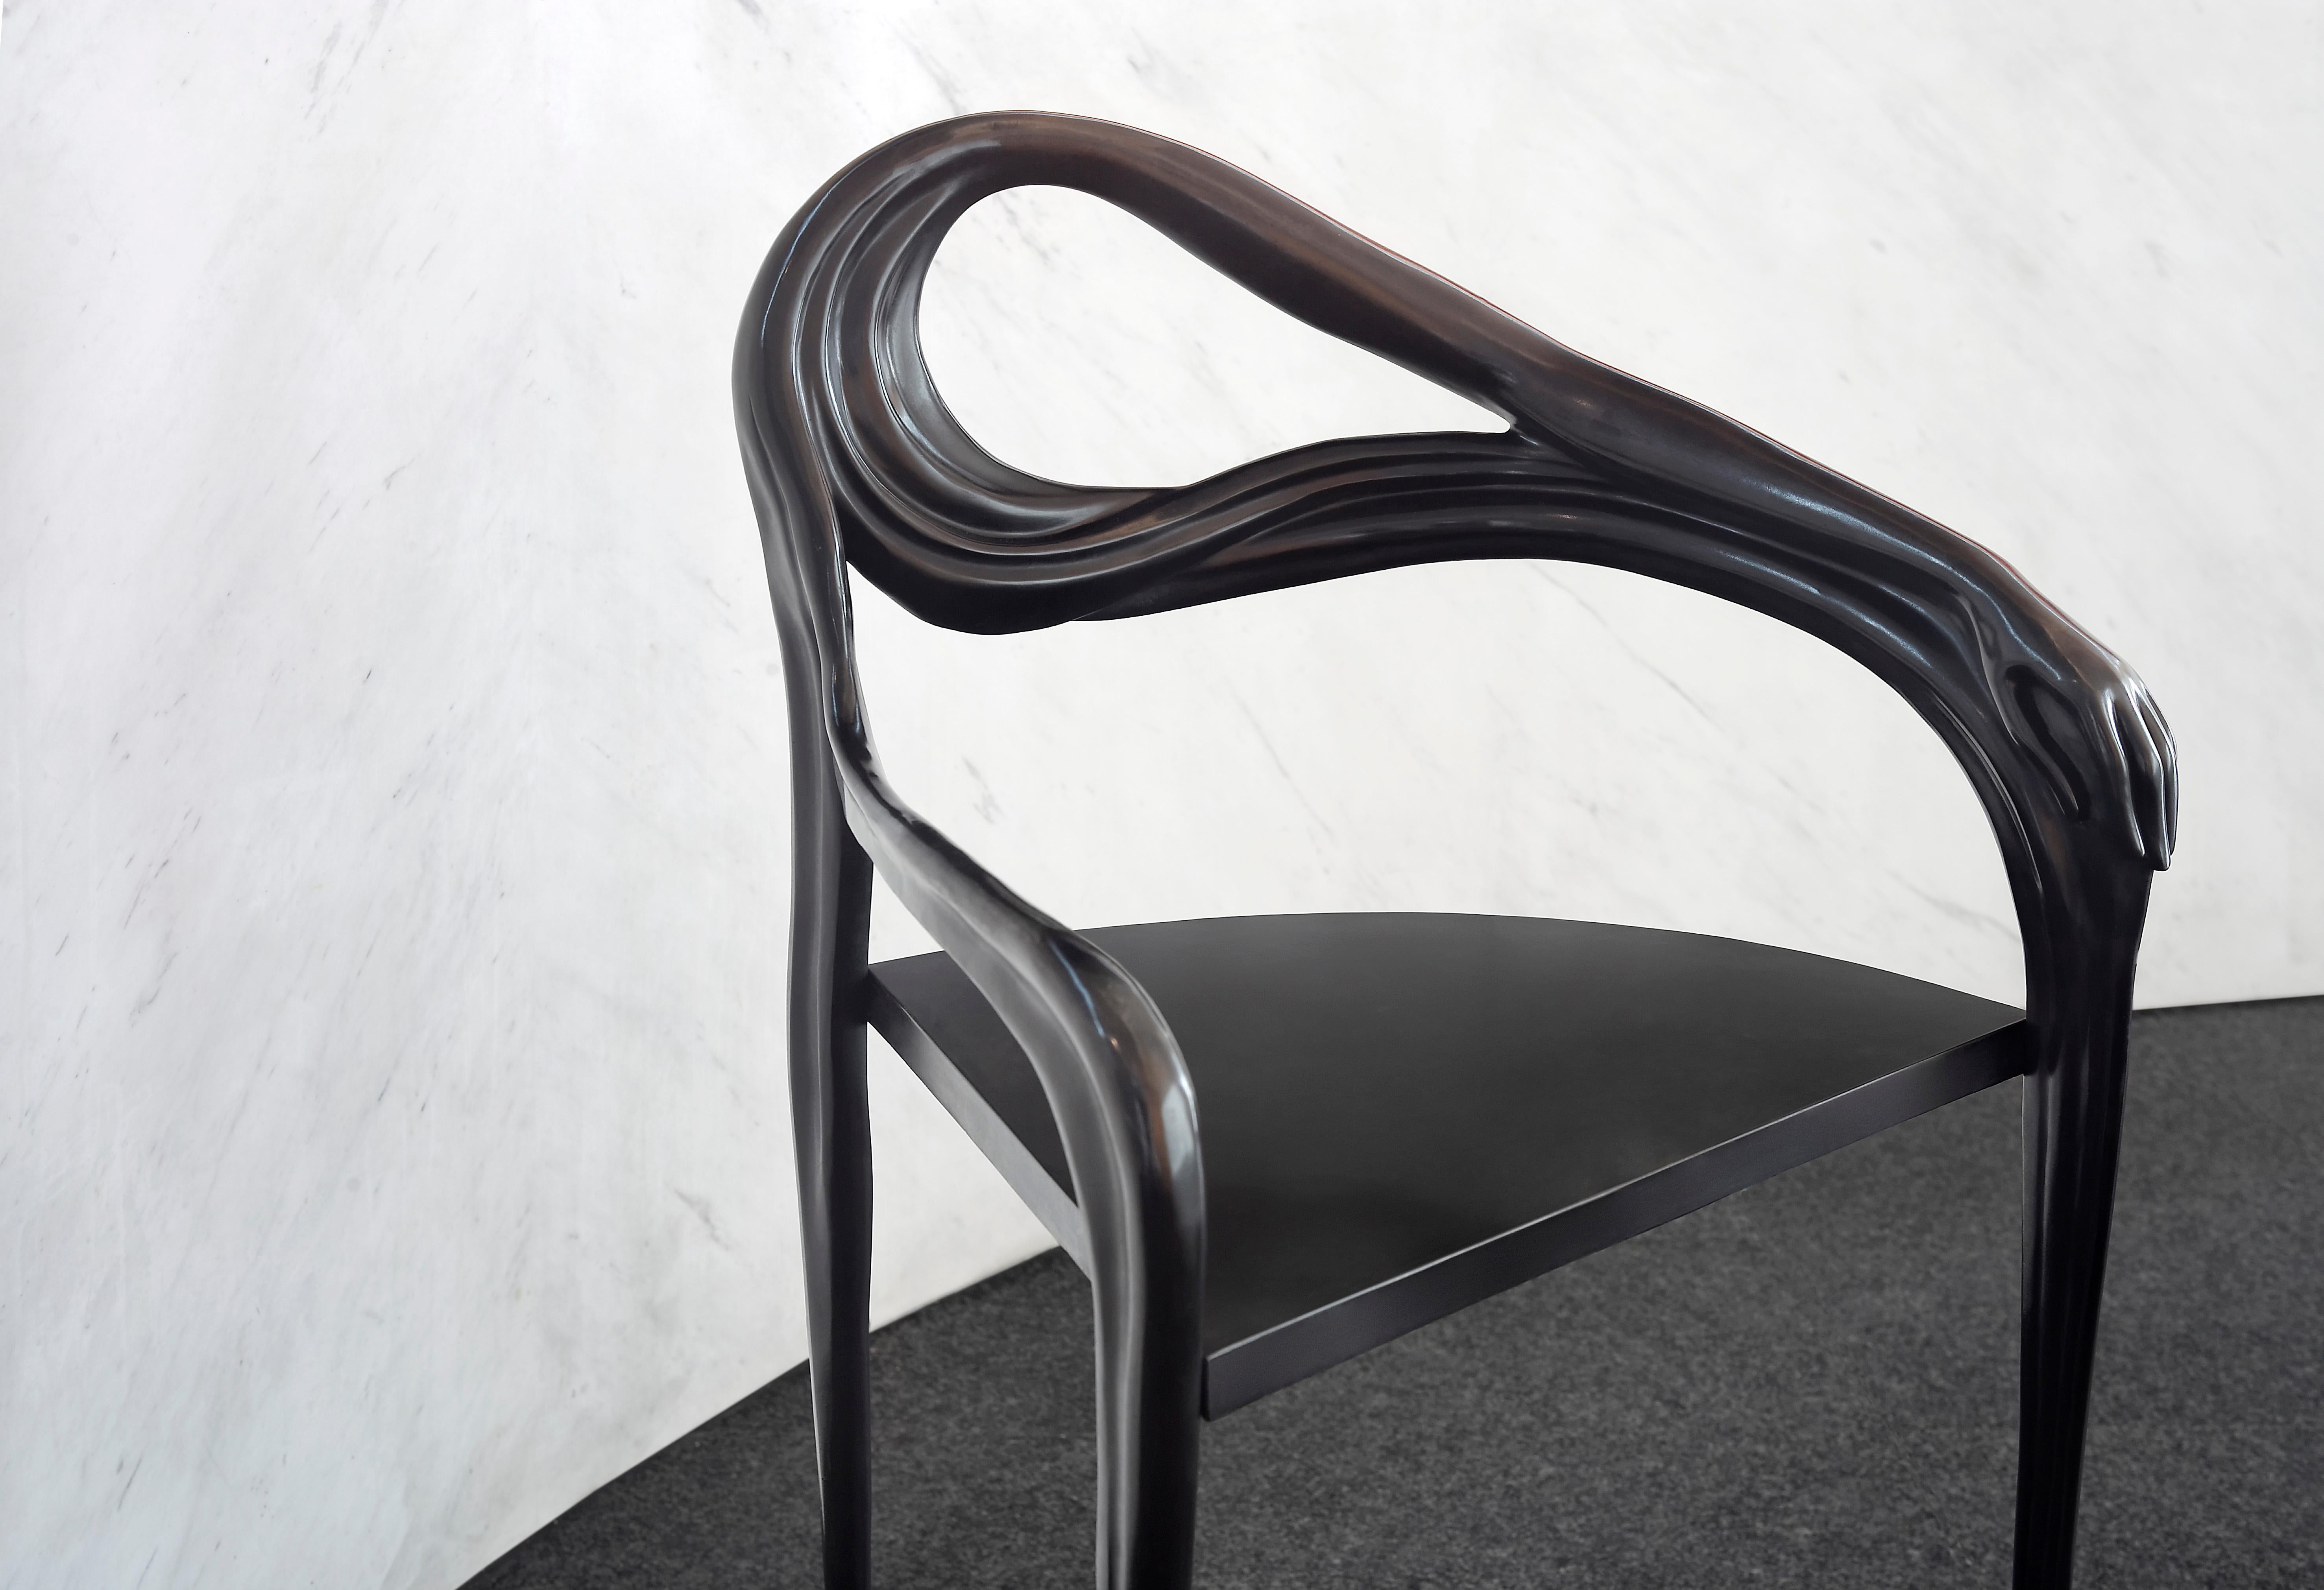 Leda armchair designed by Dali manufactured by BD.

All pieces of ironwork in this collection are made of brass. The black label Leda collection has an artisanal application of a special patina (metal dissolved in nitric acid) which is applied to a